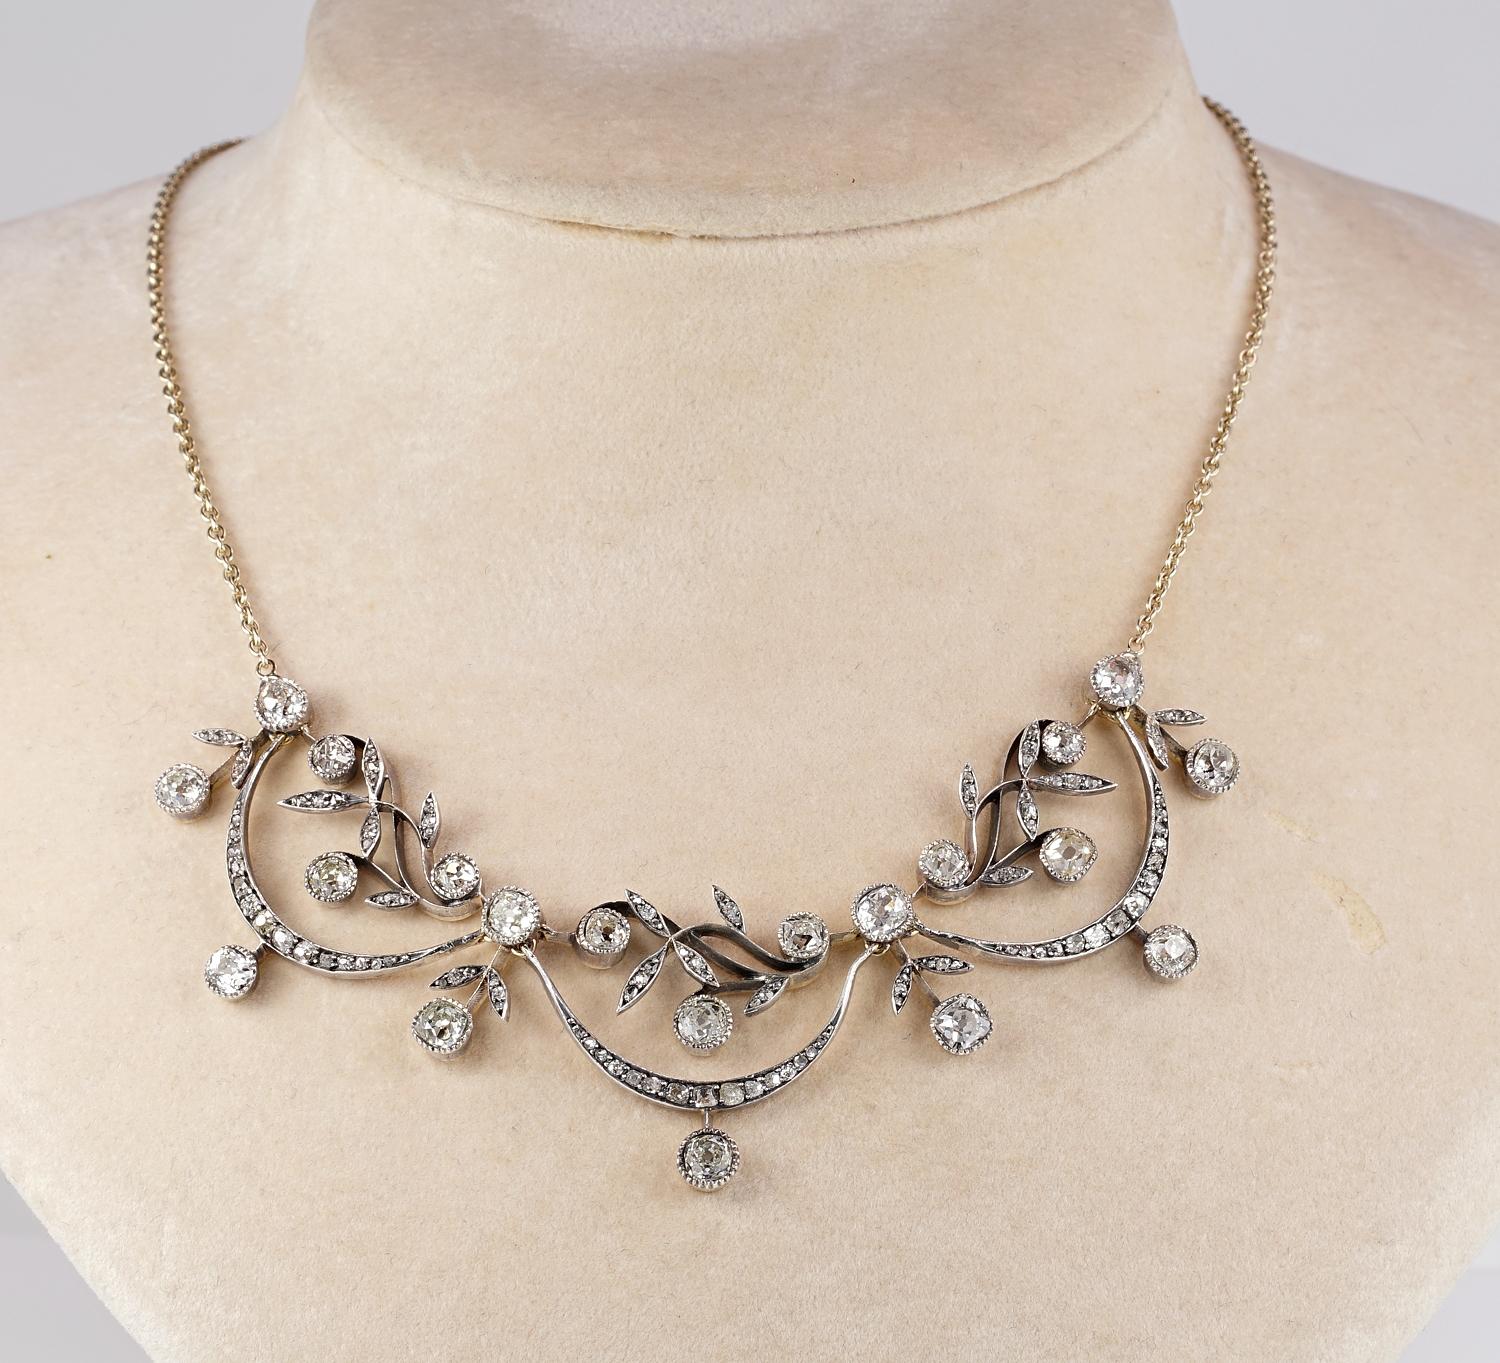 Homage to femininity

Emphatically Edwardian, this French Diamond necklace contains refined elegance and majestic workmanship of the Belle Epoque era

Delicacy in the rare design takes life with the amazing Diamond setting it has projecting a huge